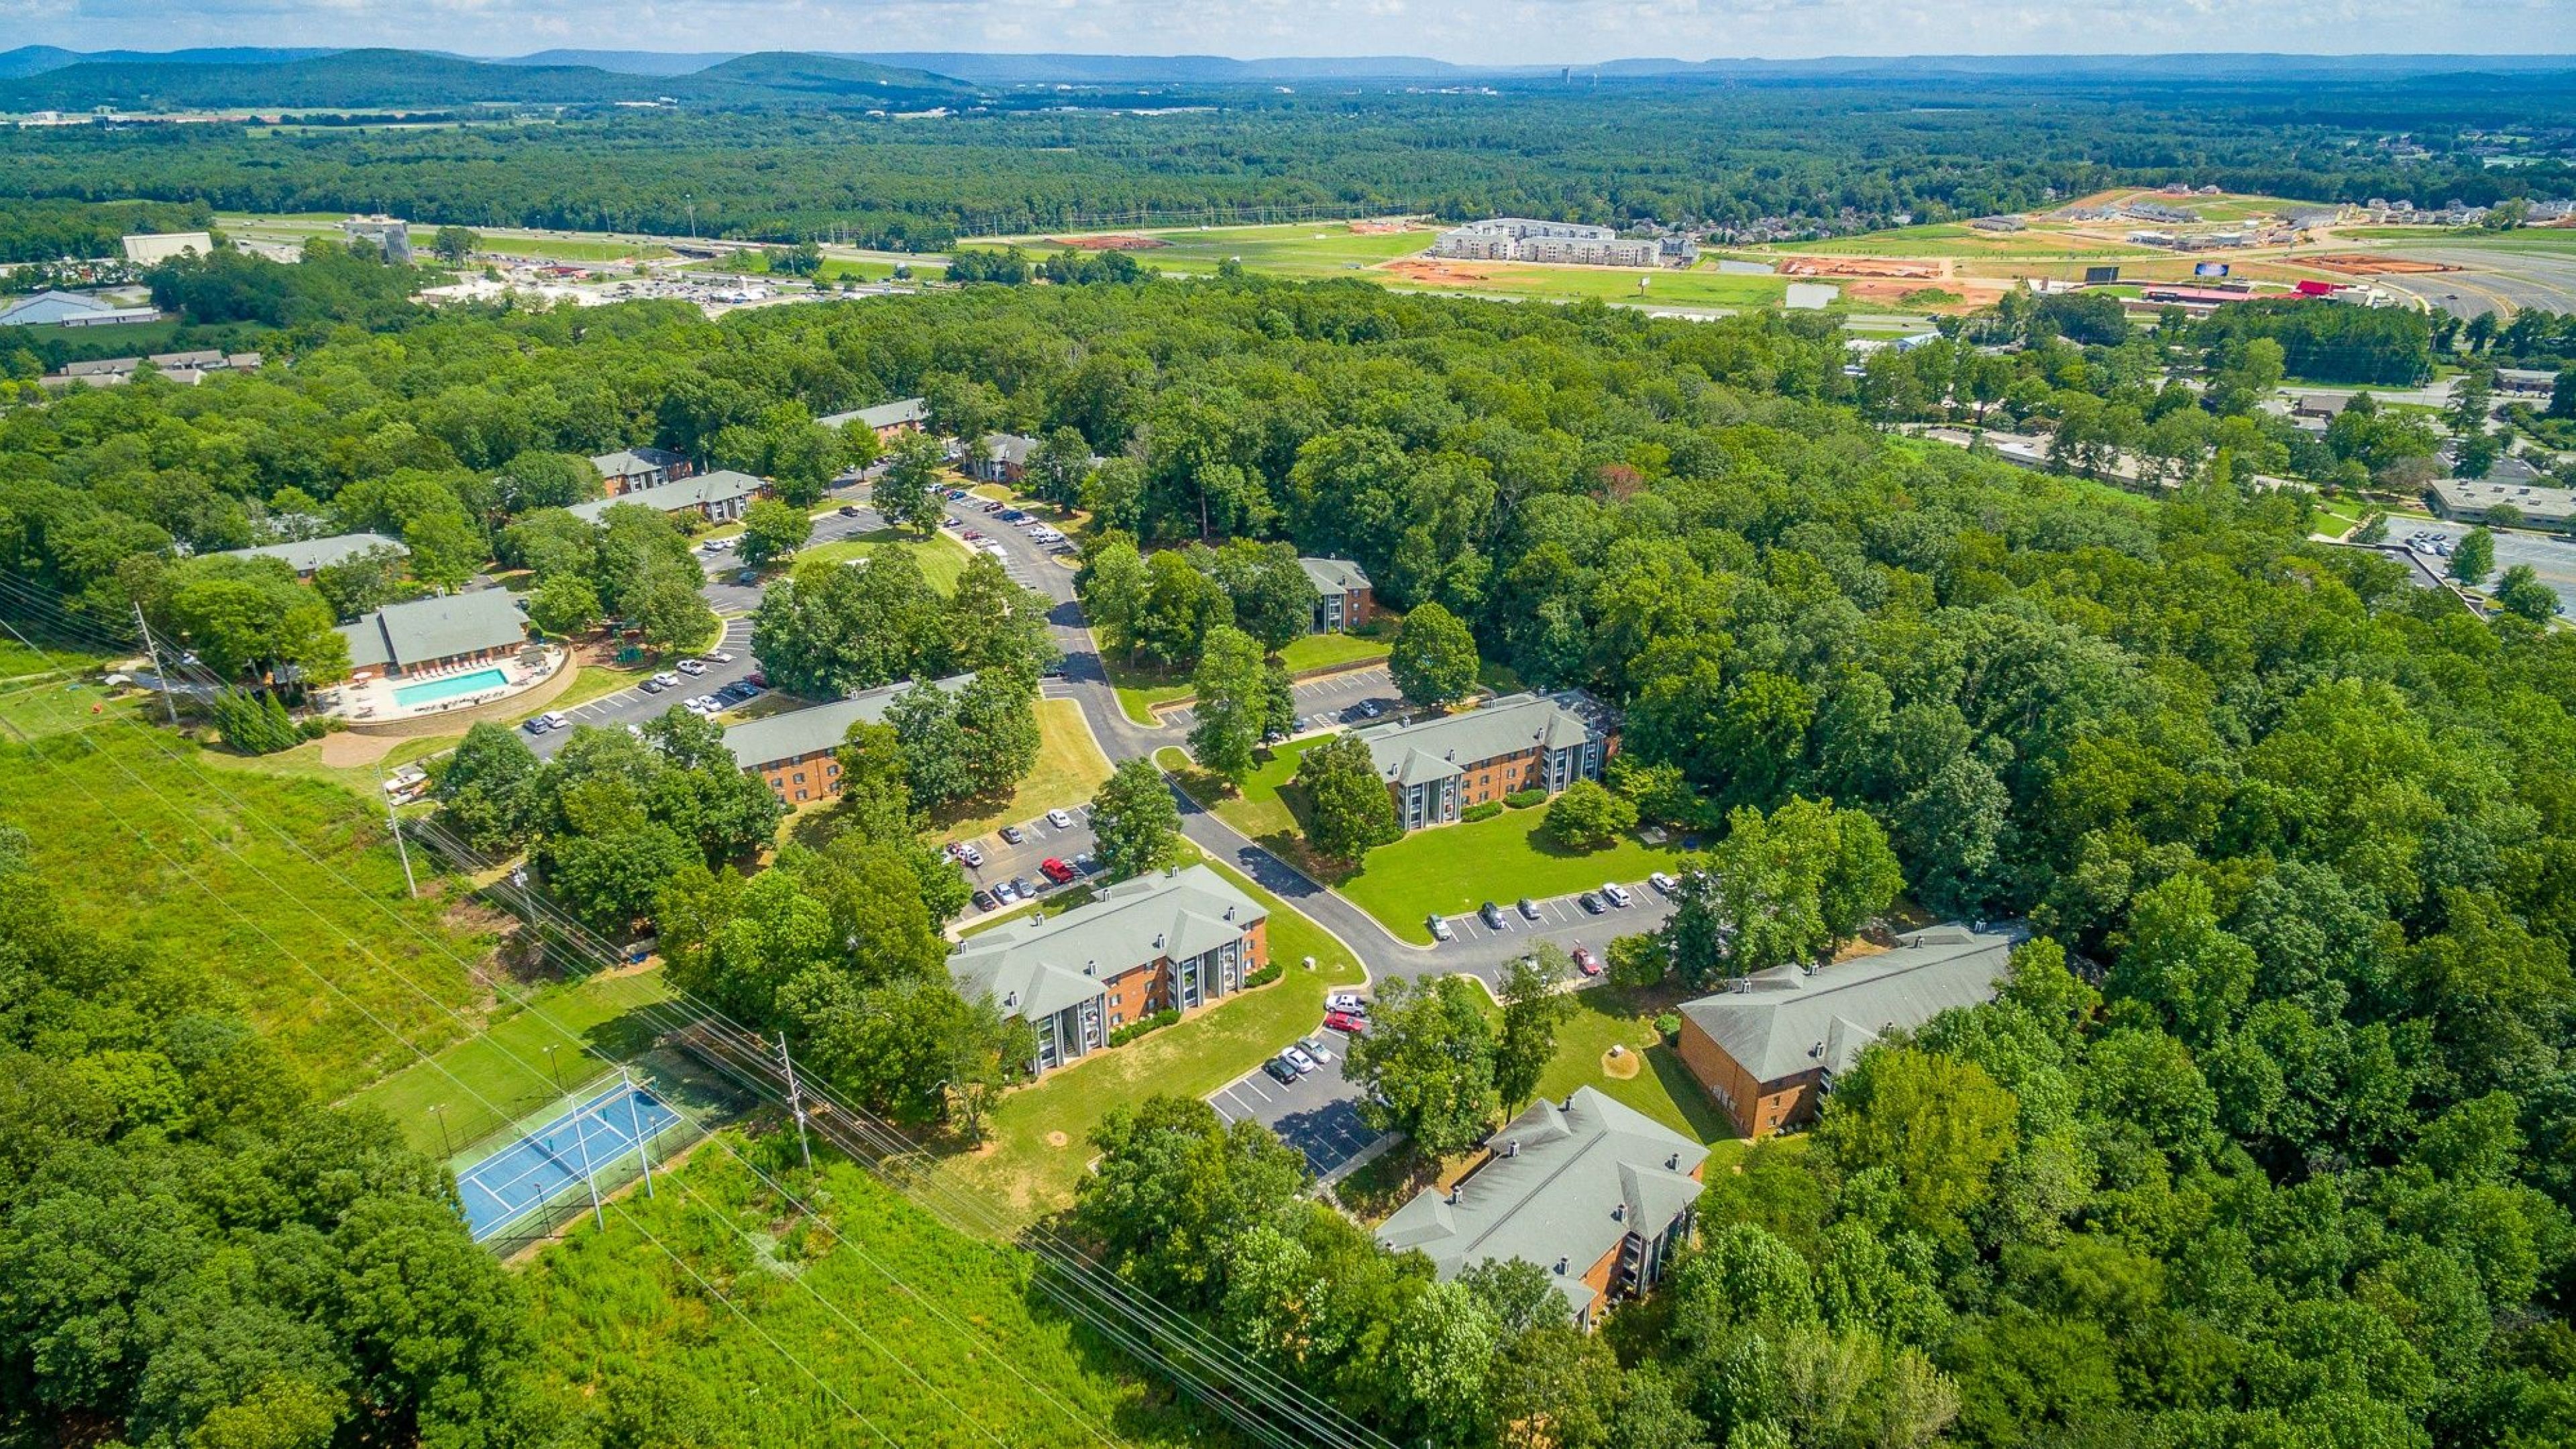 Hawthorne at the Ridge aerial view of community including apartment buildings, pool, tennis court, and parking, look towards Madison, Alabama